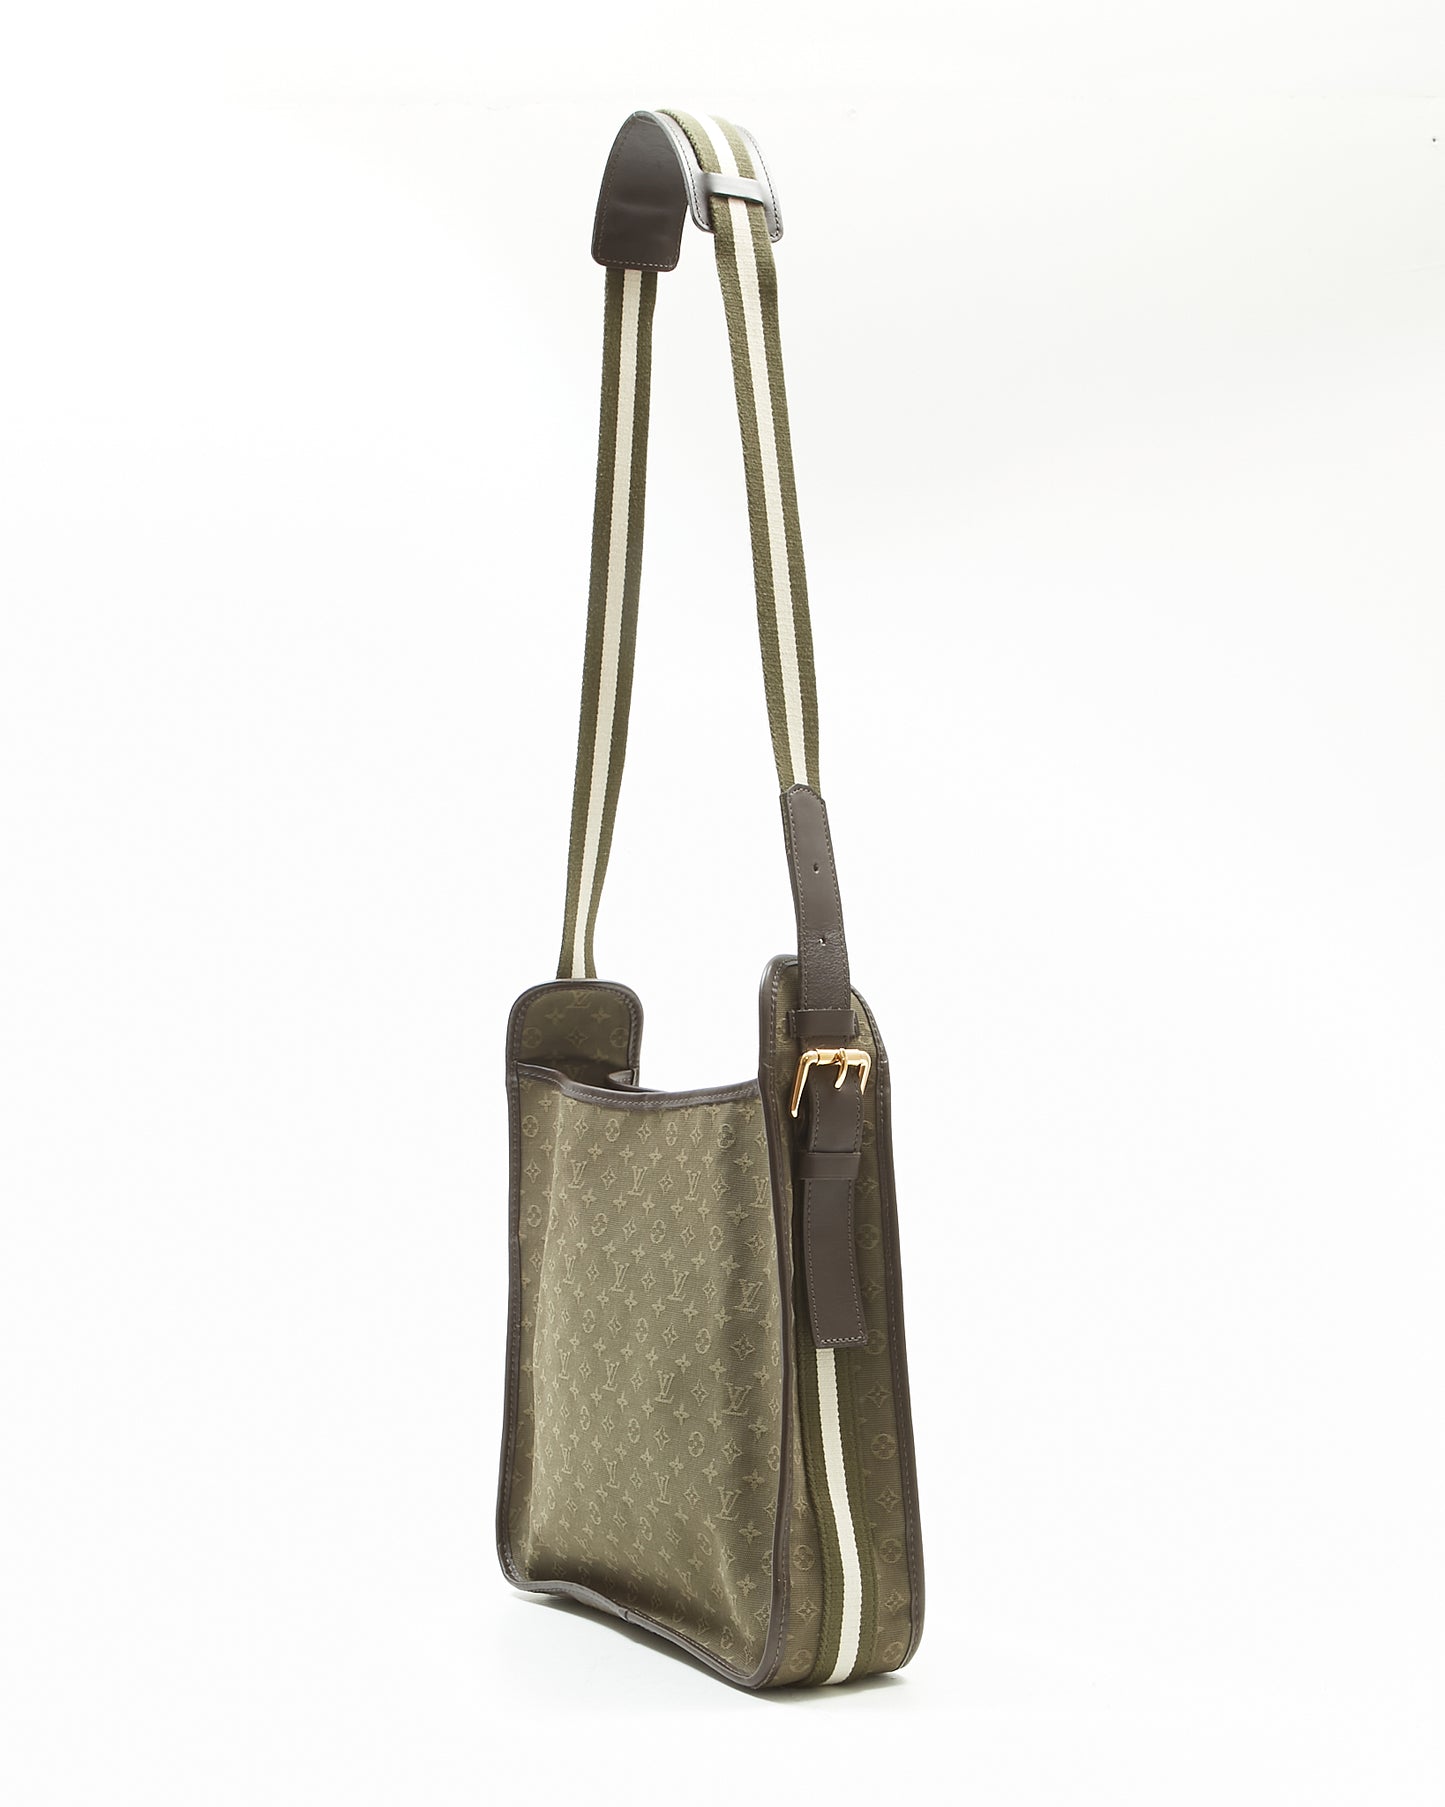 Louis Vuitton Sac messager Mary Kate Besace en toile monogramme Mini Lin vert olive